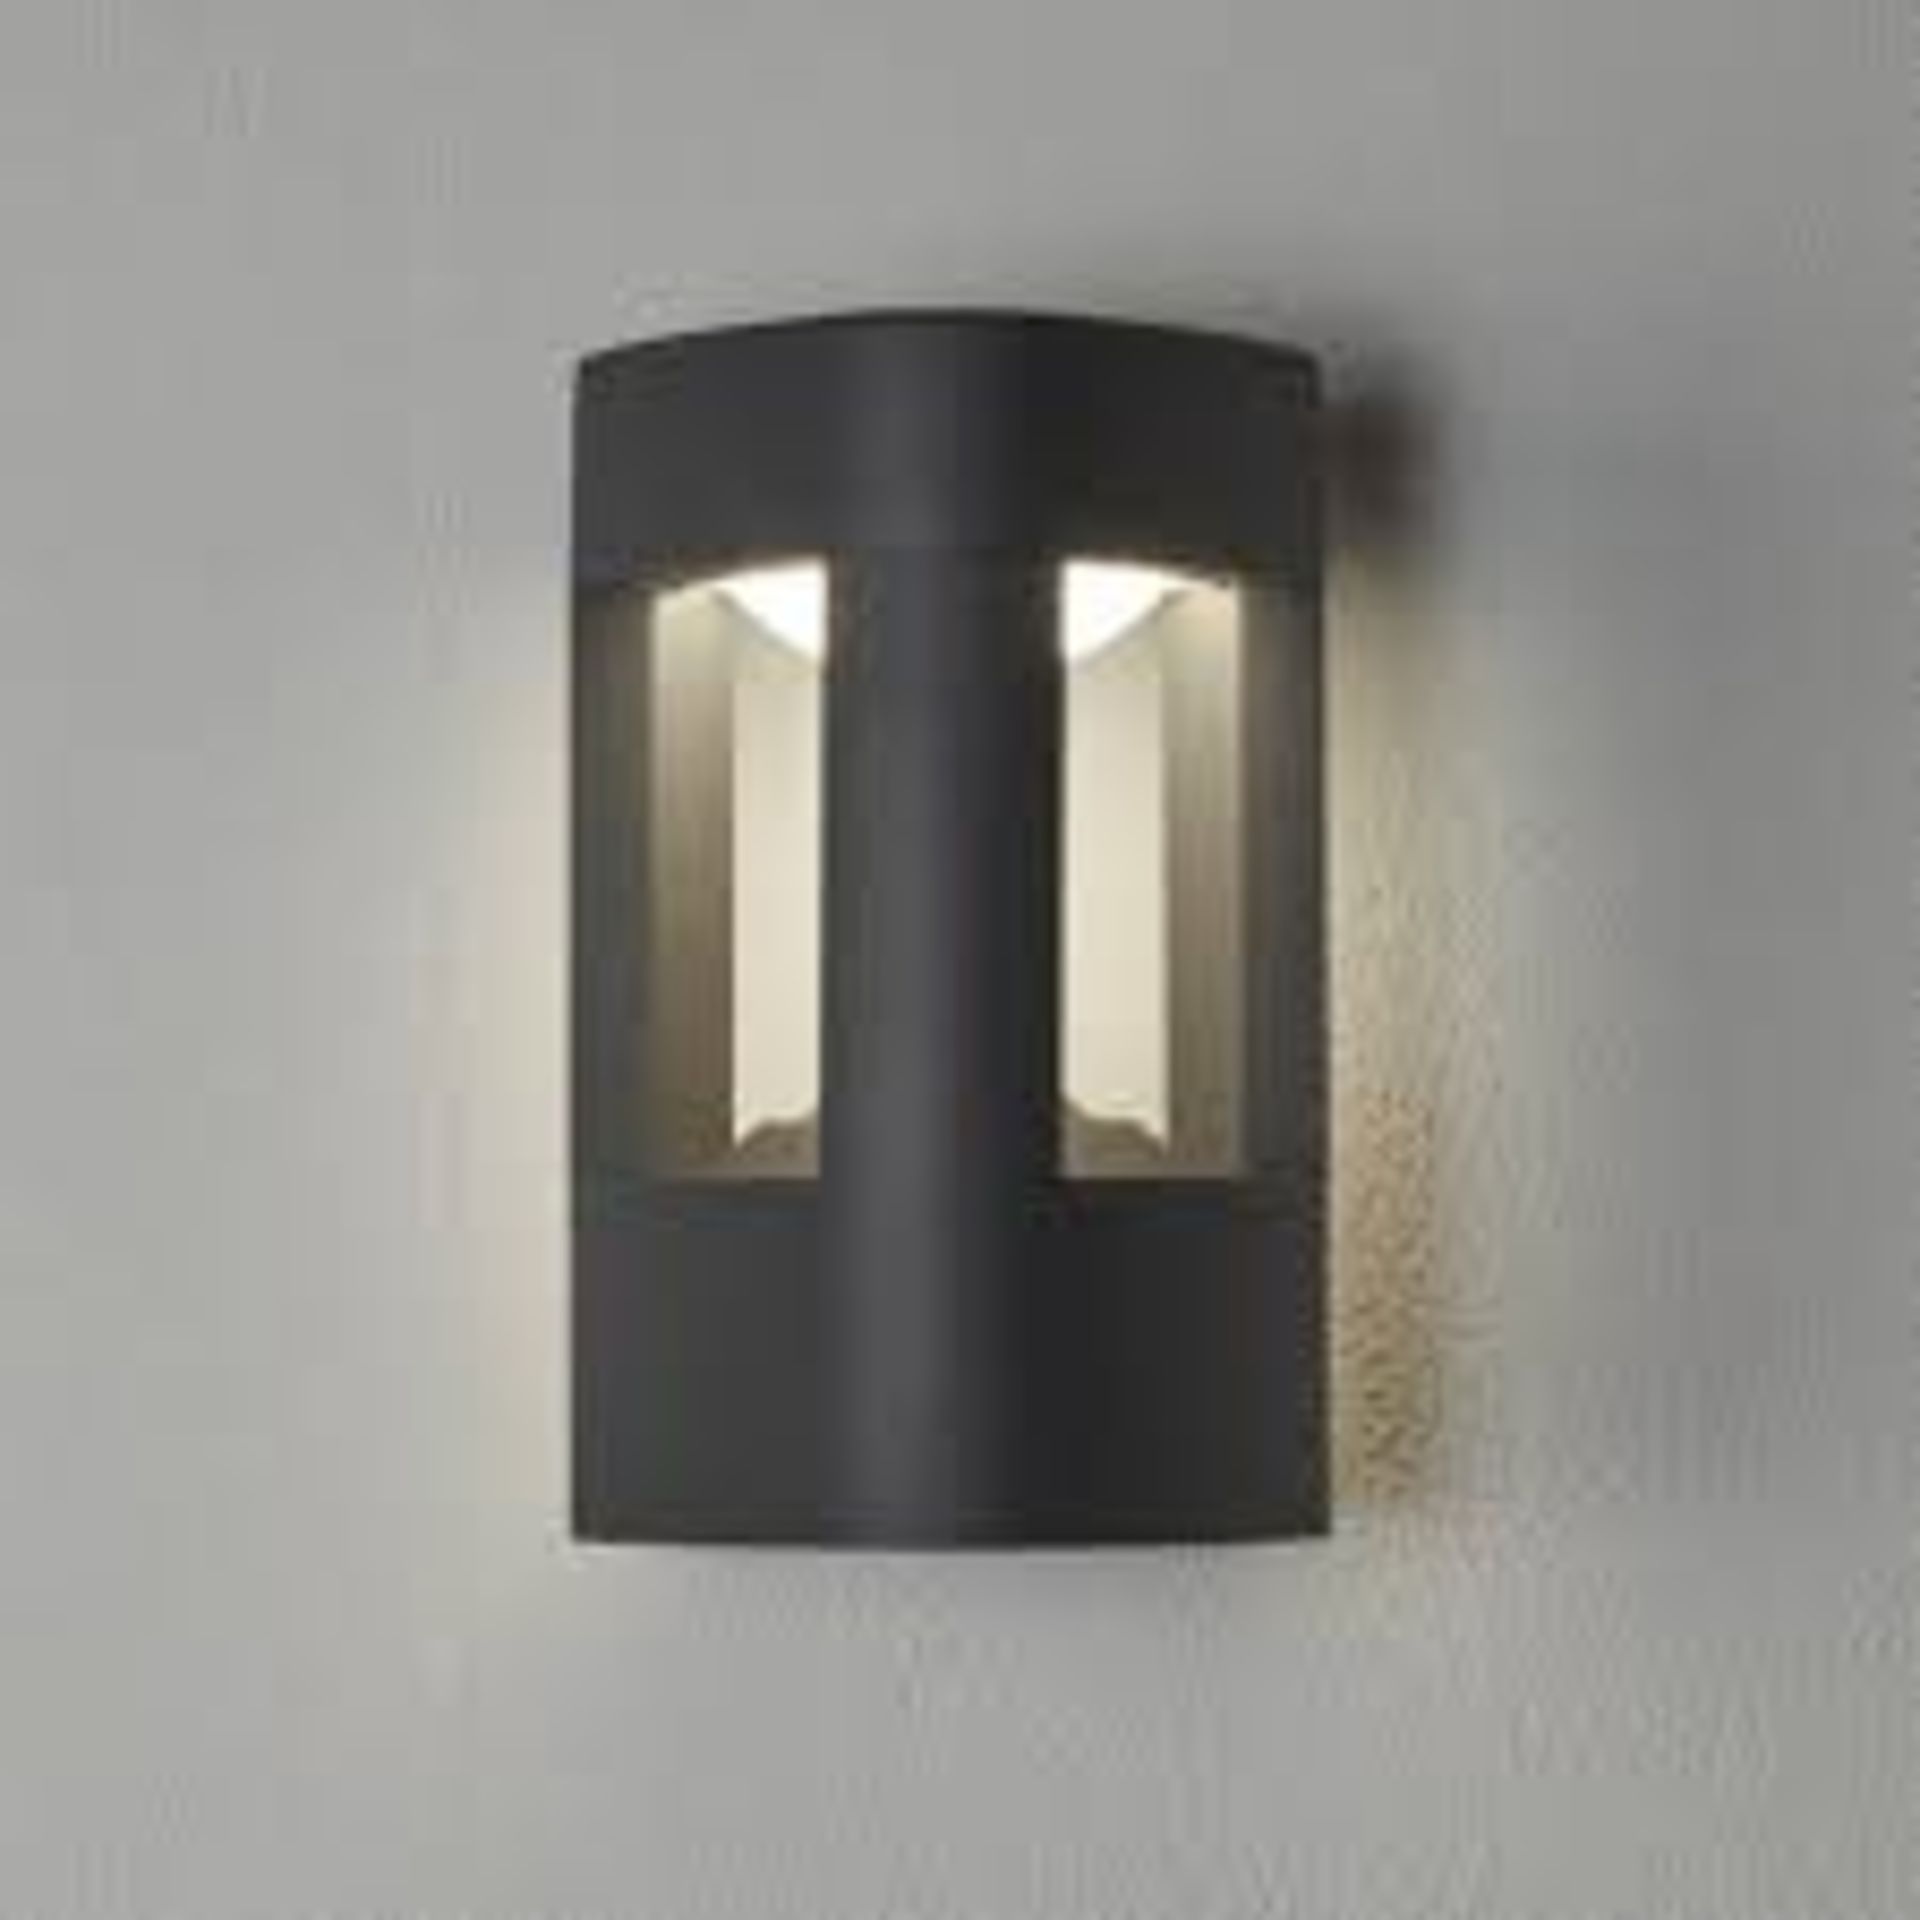 1 x Searchlight LED Outfoor Wall Light in dark grey - Ref: 2005GY - new and Boxed - RRP: £75.00 - Image 4 of 4